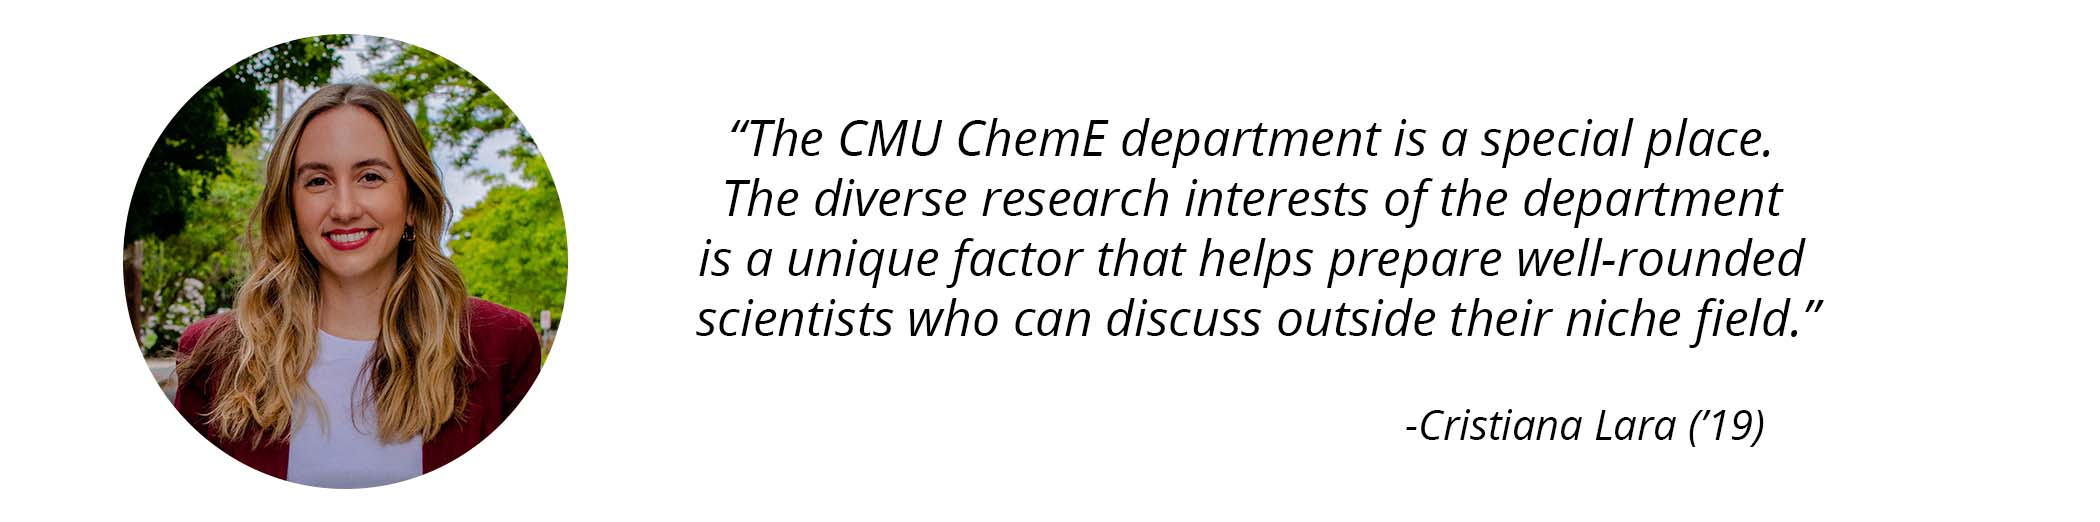 Cristiana Lara ('19) photo and quote - "The CMU ChemE department is a special place. The diverse research interests of the department is a unique factor that helps prepare well-rounded scientists who can discuss outside of their niche field."